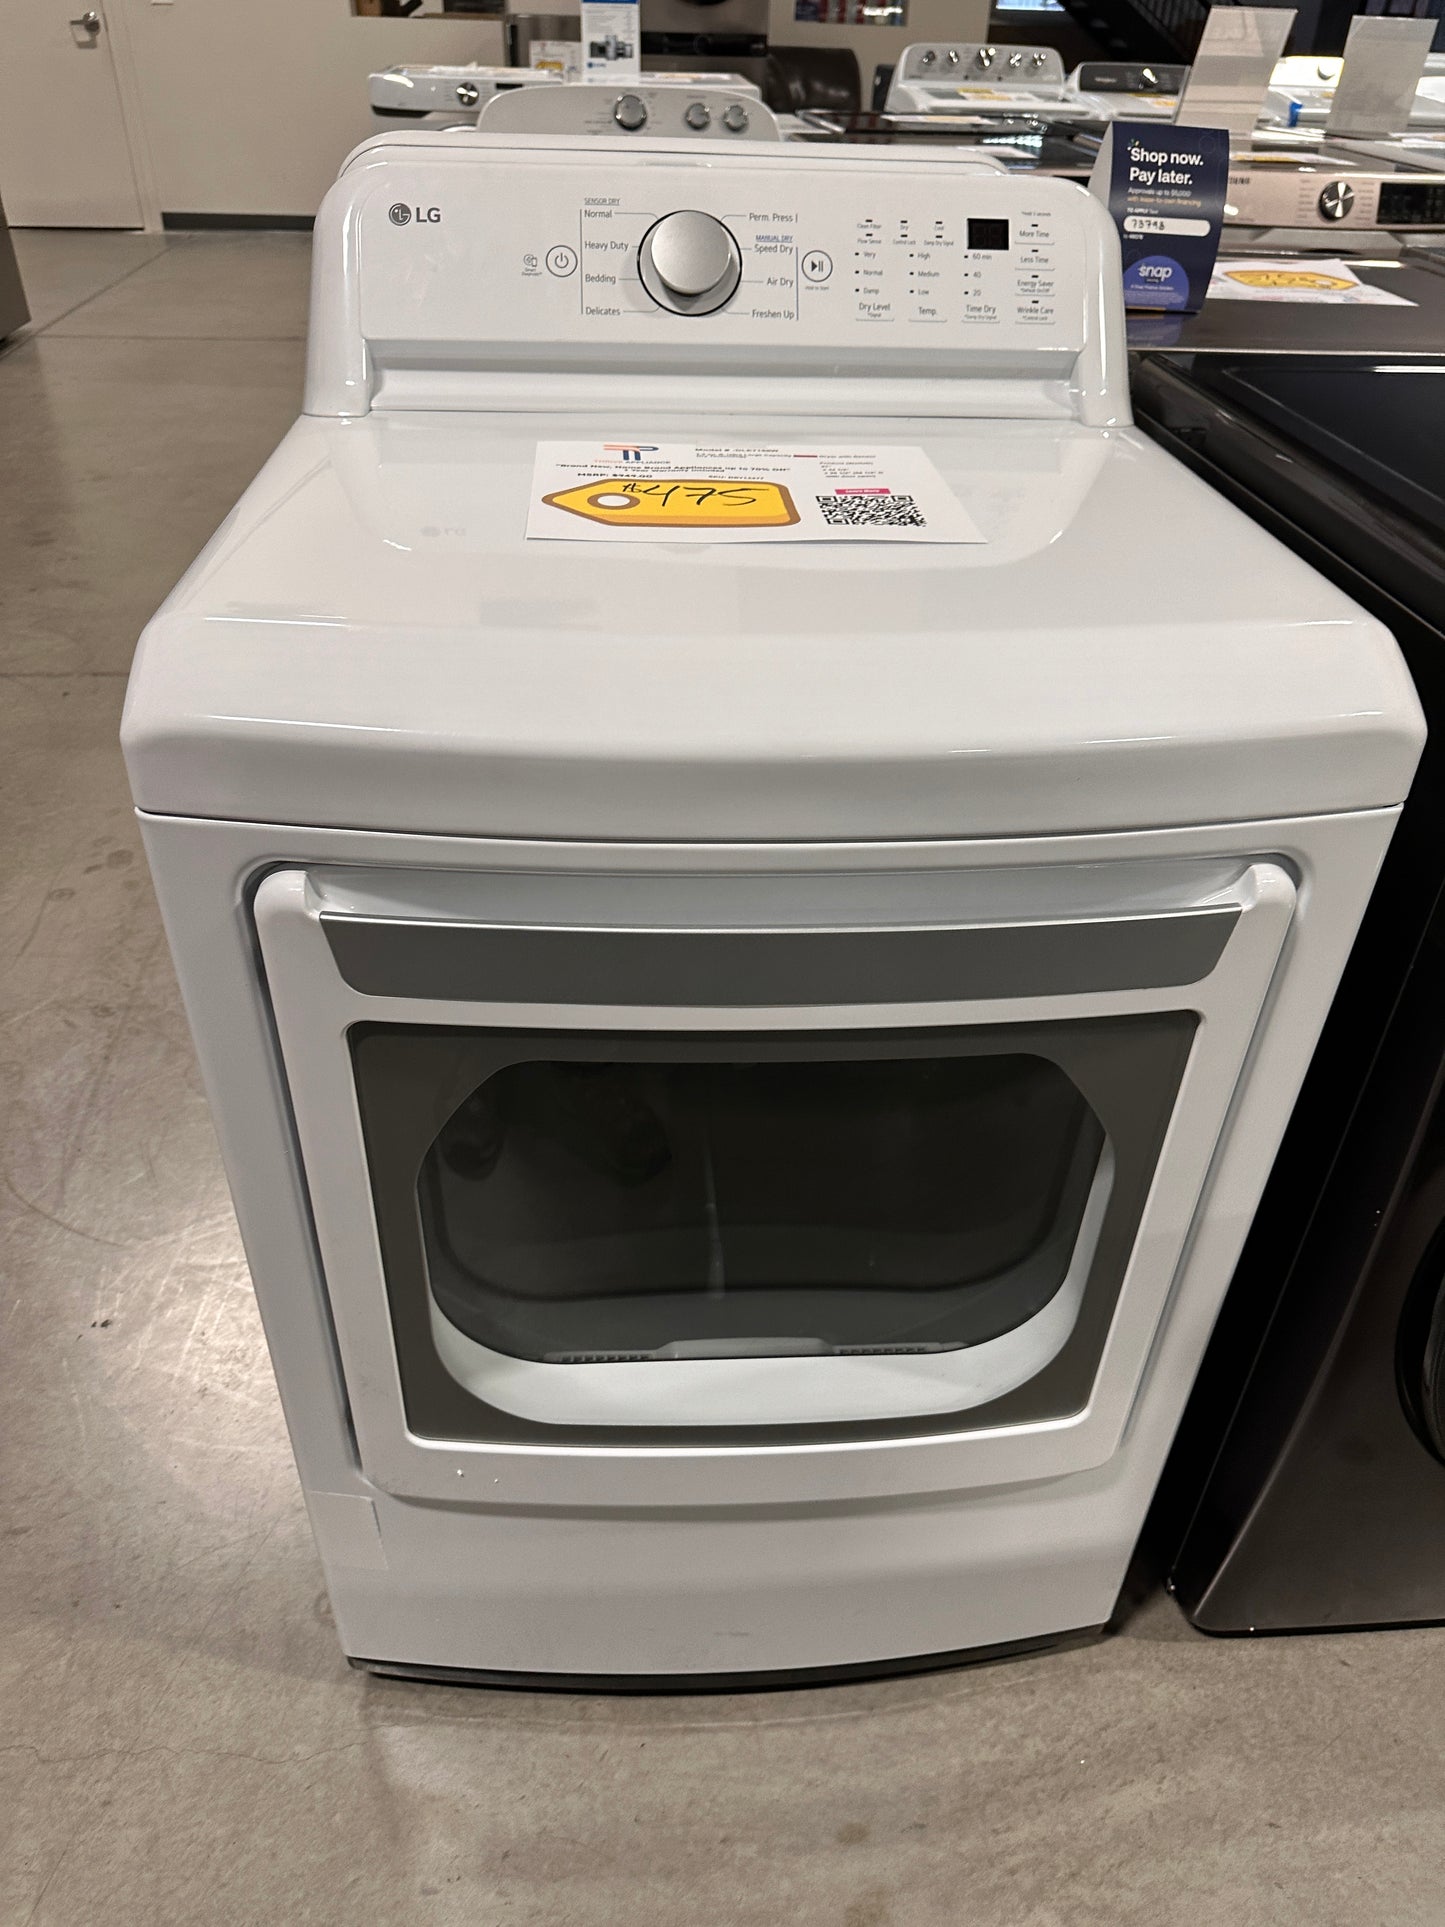 NEW LG - 7.3 Cu. Ft. Electric Dryer with Sensor Dry - White  MODEL: DLE7150W  DRY12477